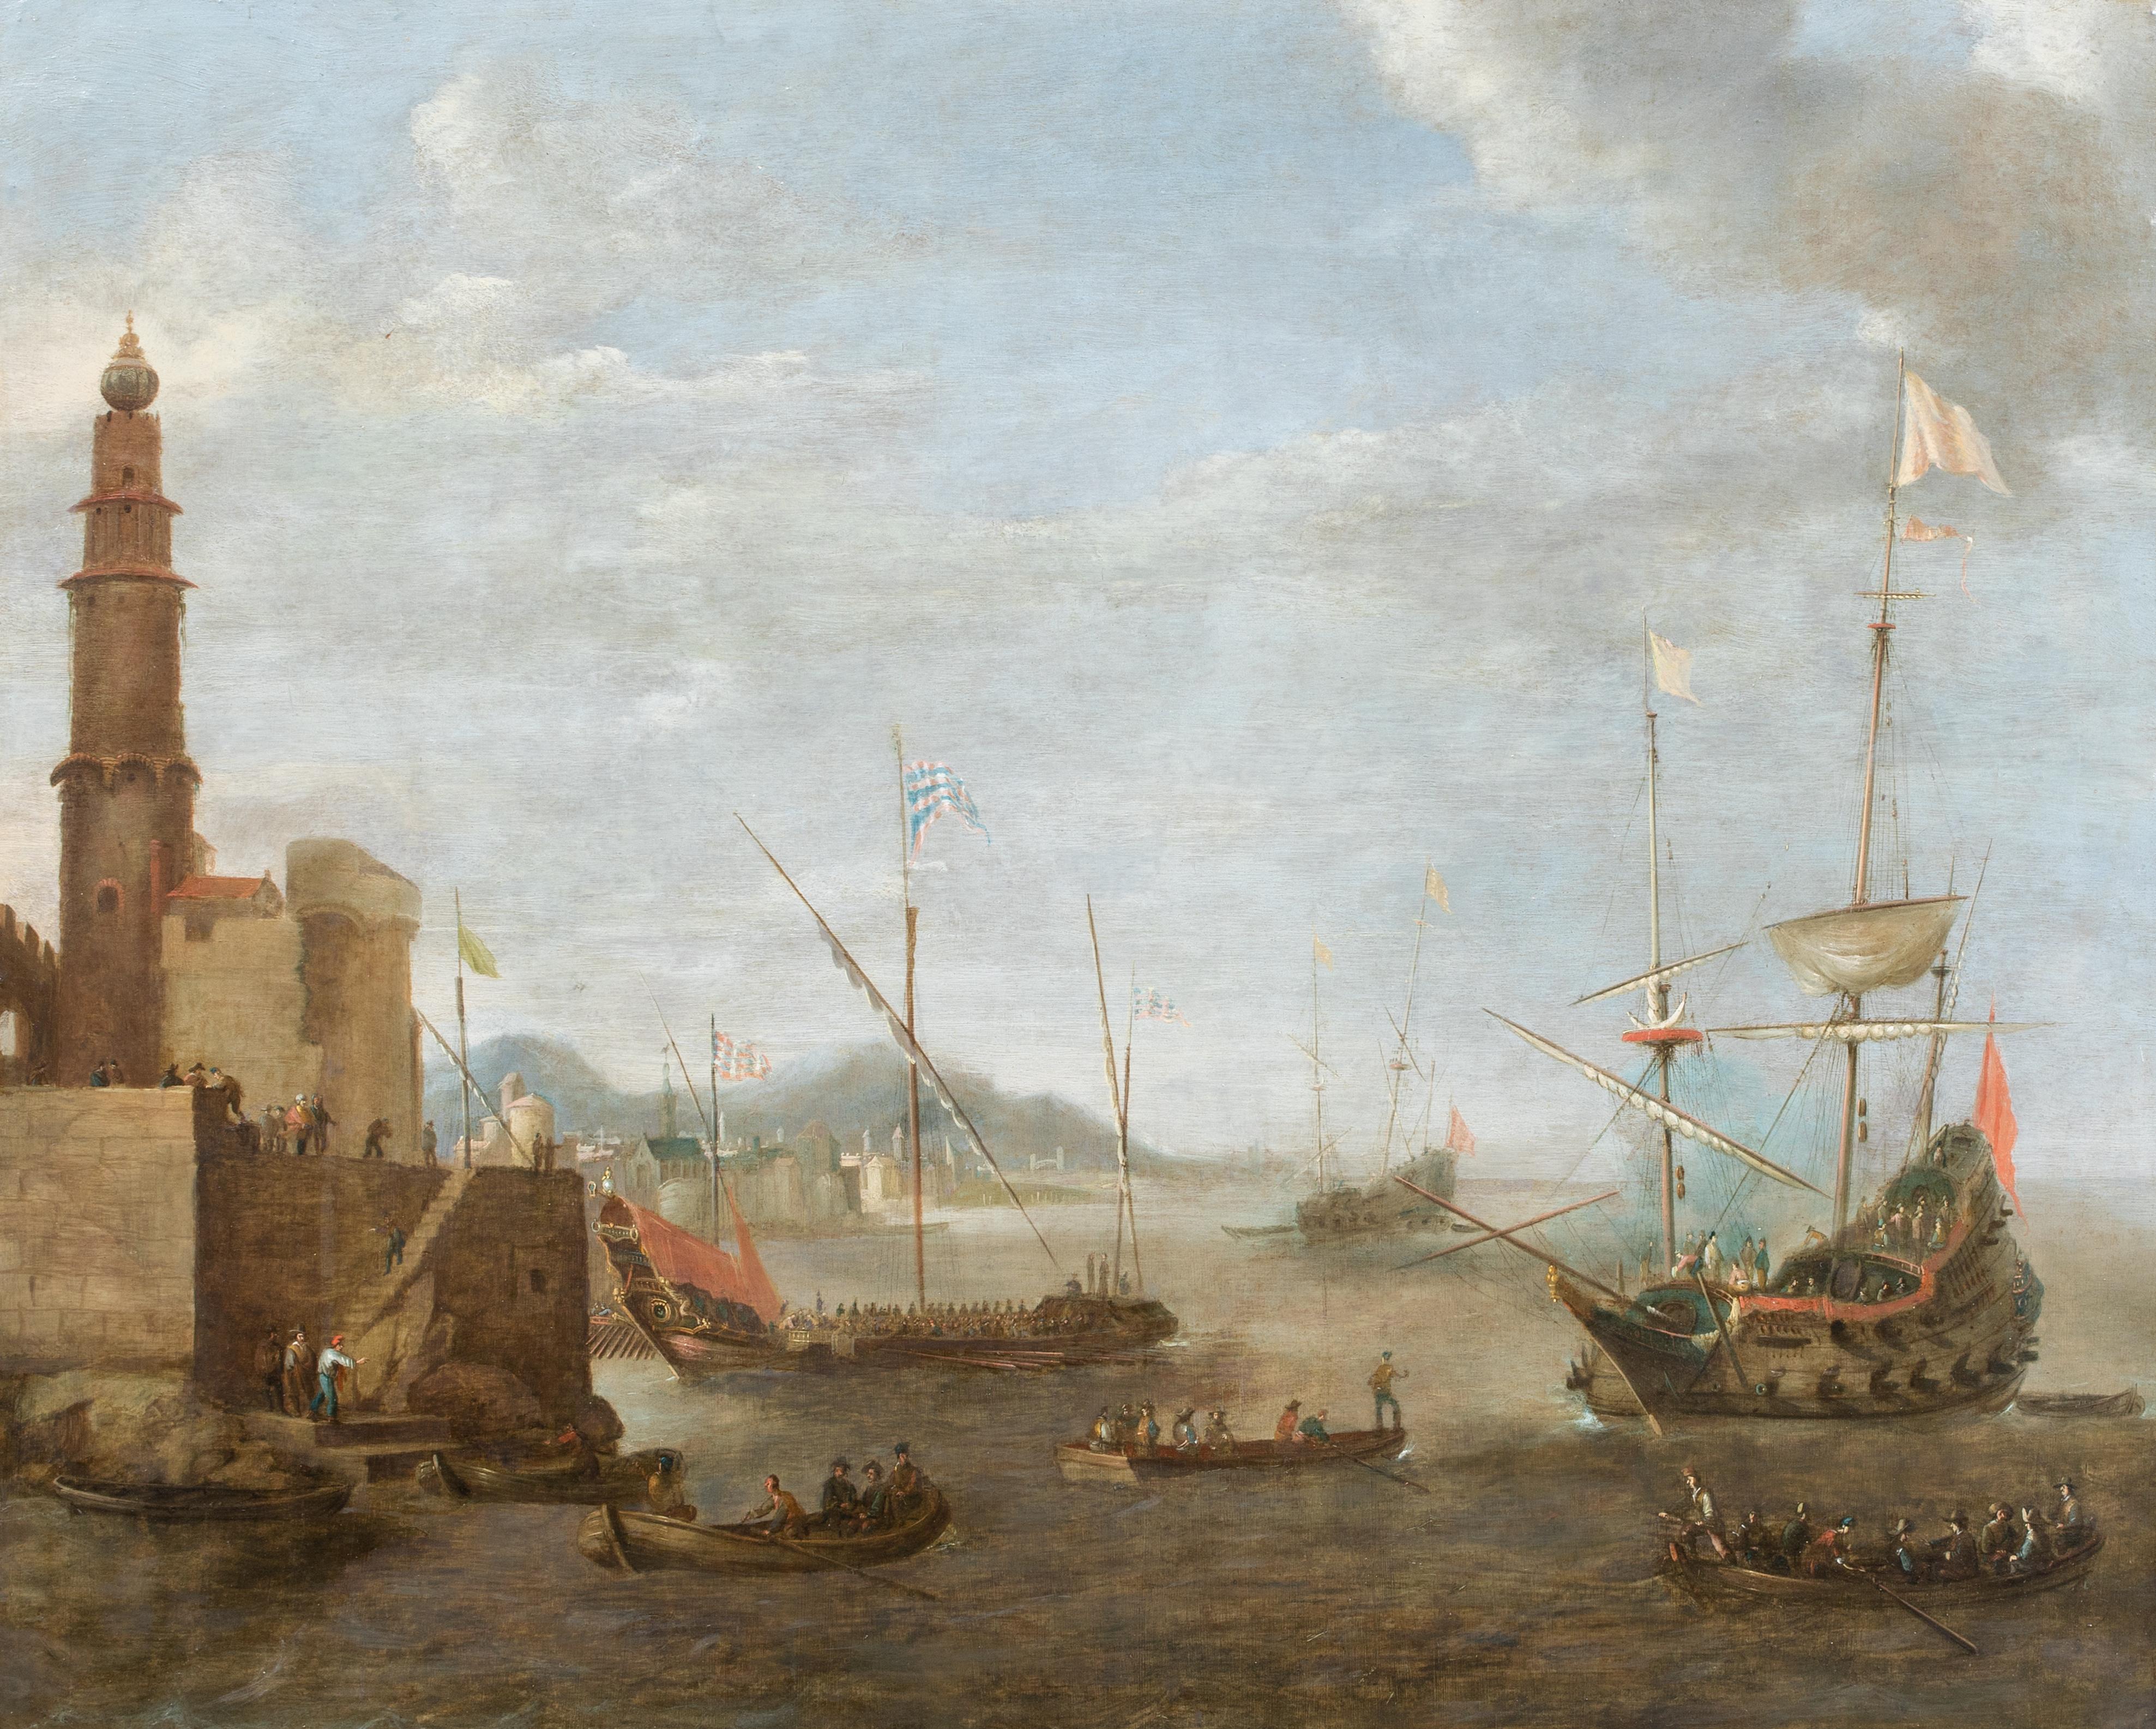 The Dutch Navy Off A Turkish Ottoman Trade Post, 17th Century

attributed to Bonaventura I PEETERS (1614-1652)

Large 17th Century Dutch Old Master of the Dutch Men-Of-War anchored off an Ottoman trade post, oil on copper. Exceptional quality and